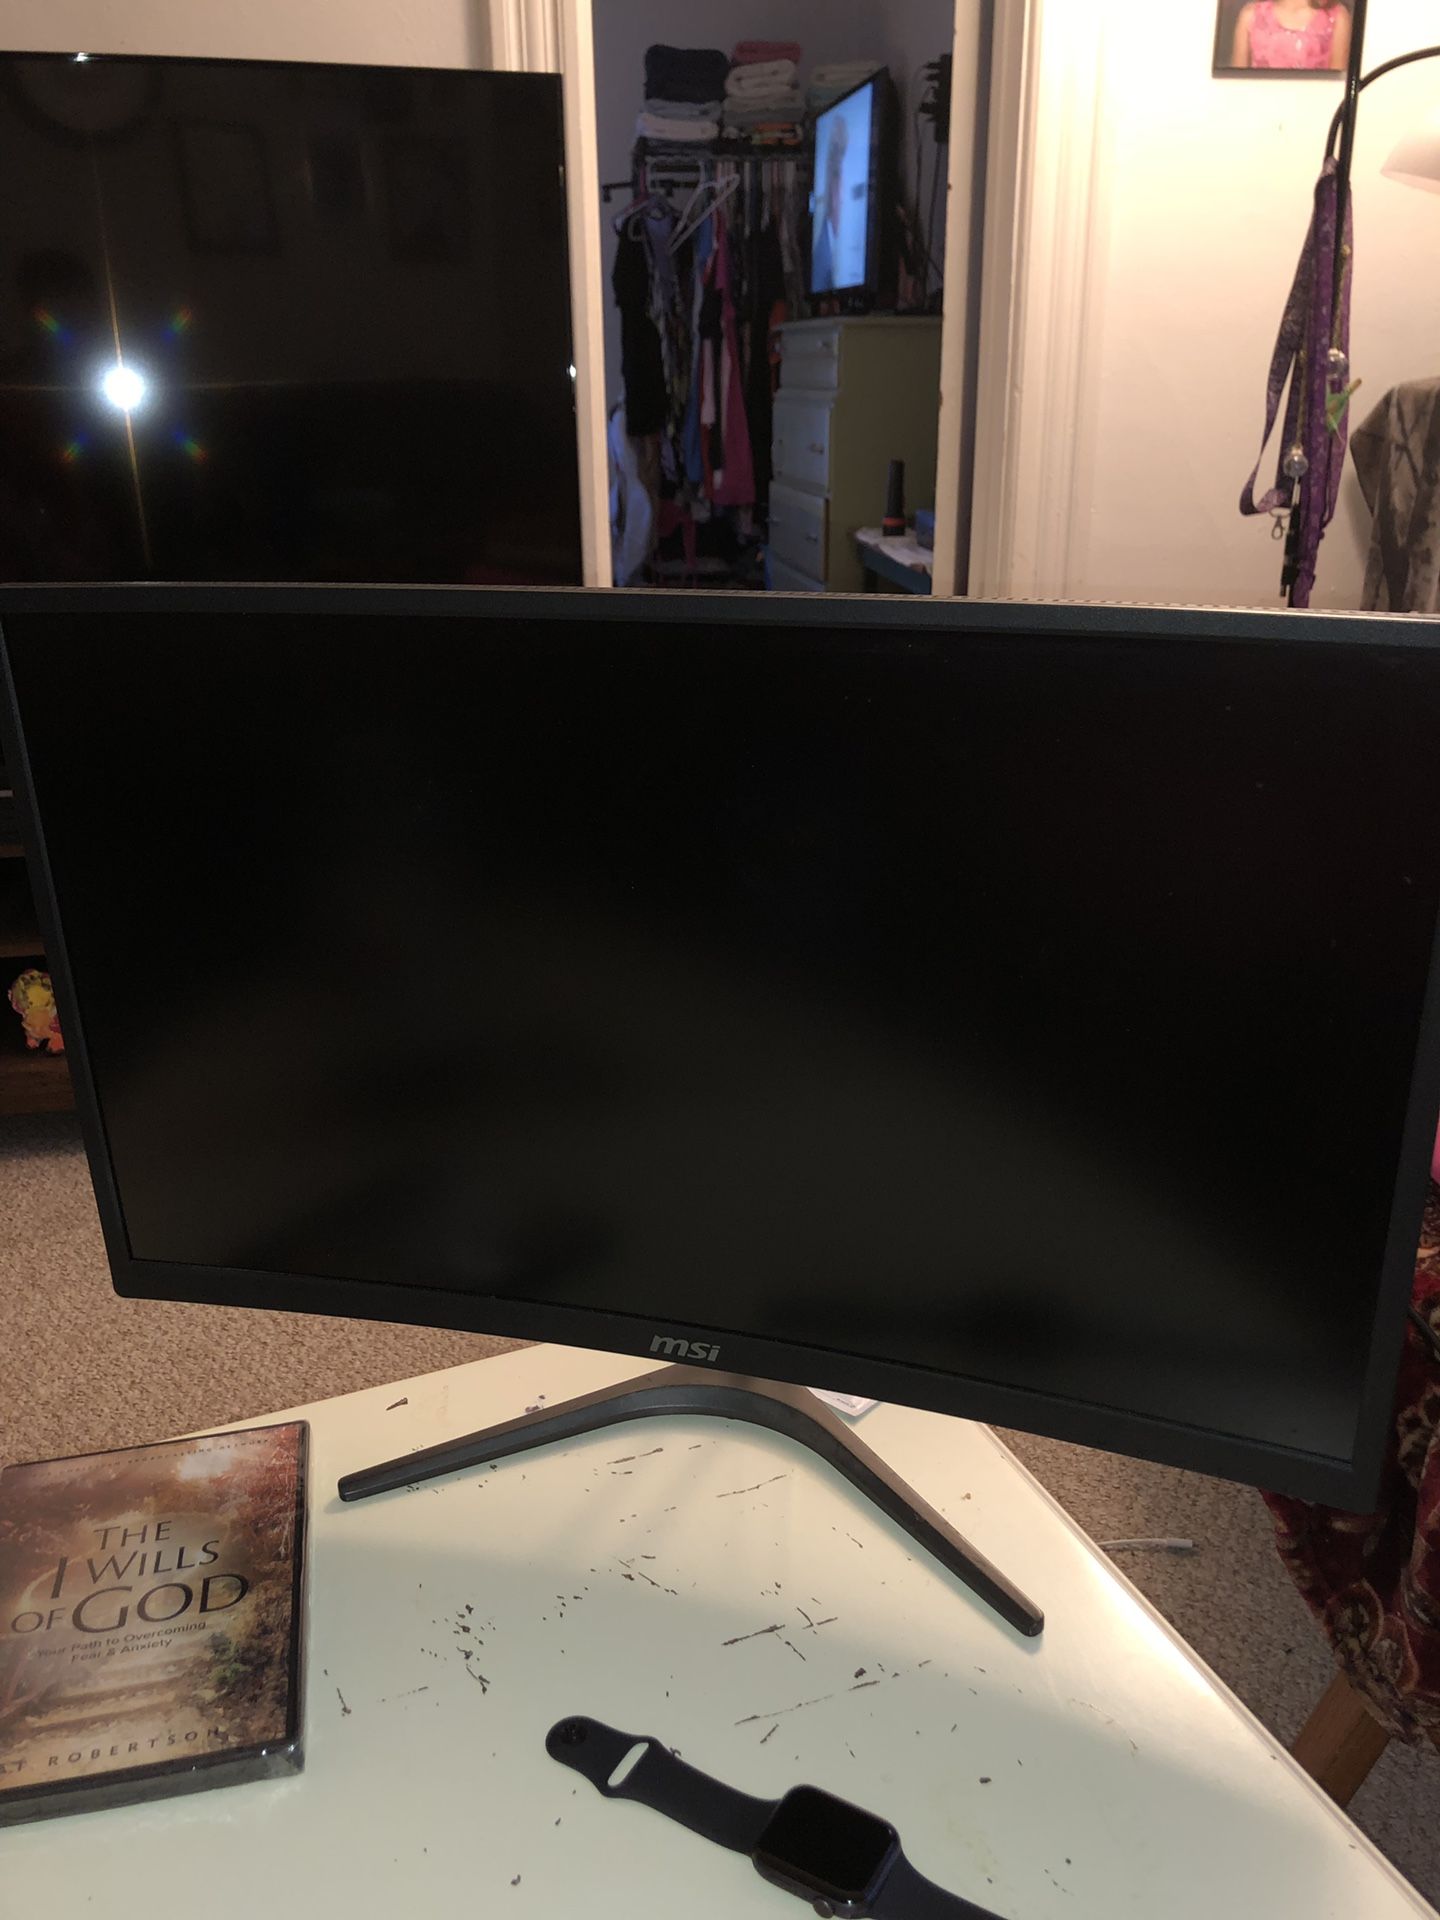 24” curved monitor